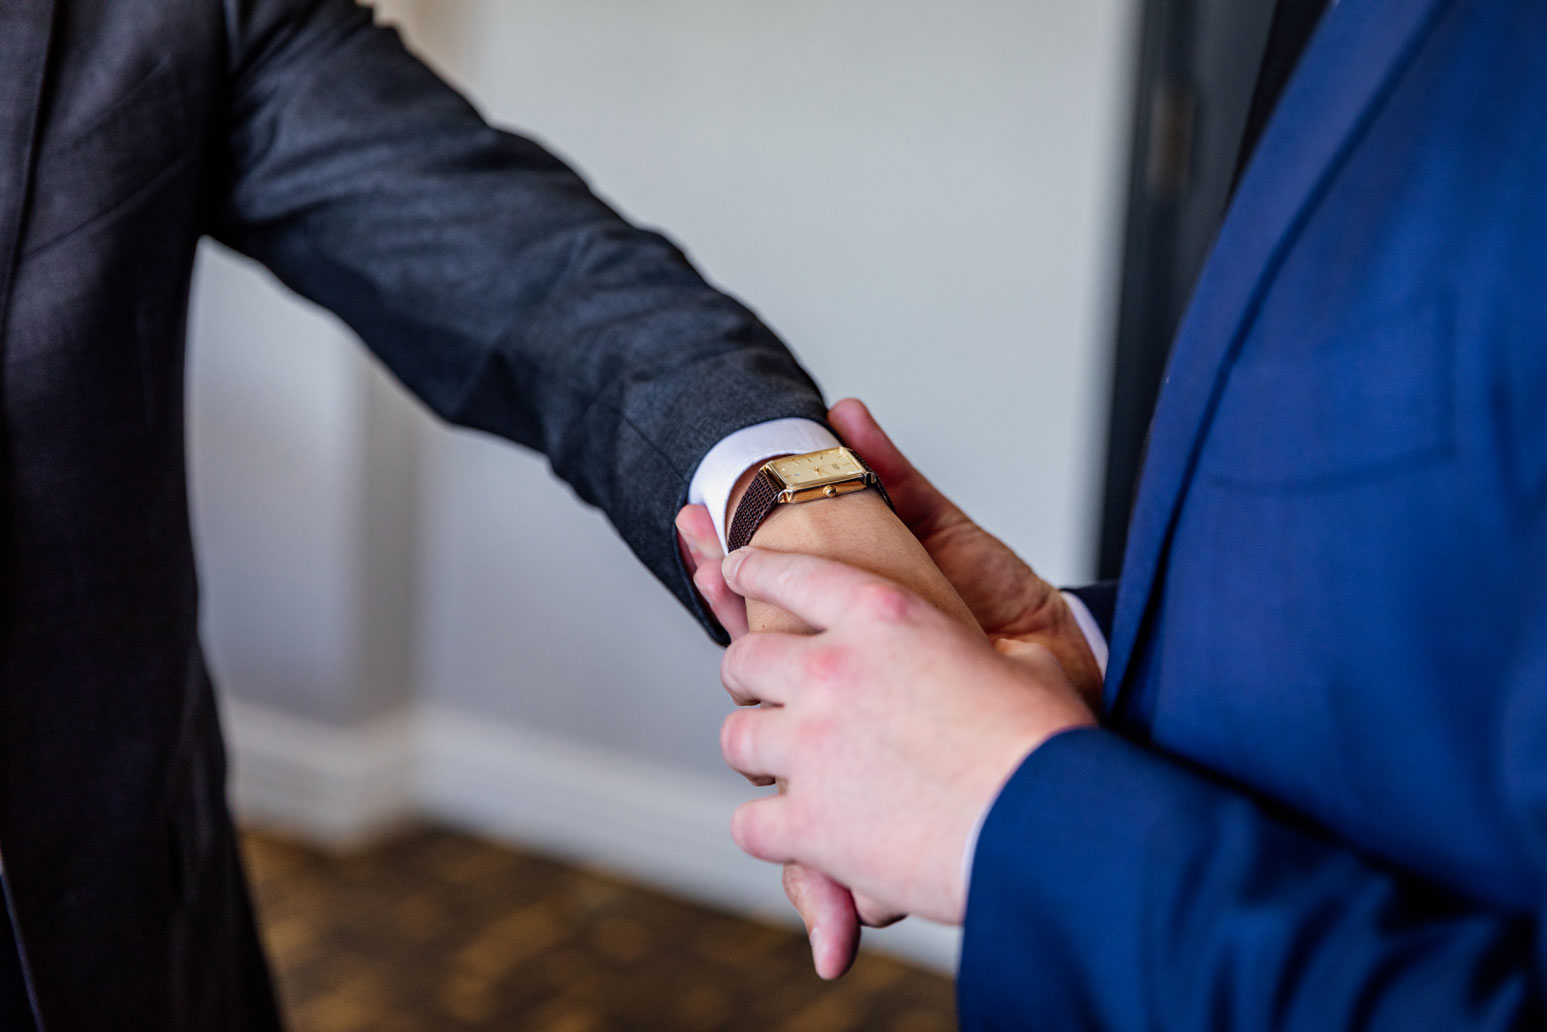 The University Club of San Francisco Wedding - getting ready photos- groom wearing his dad's watch so his dad could be with him on his wedding day